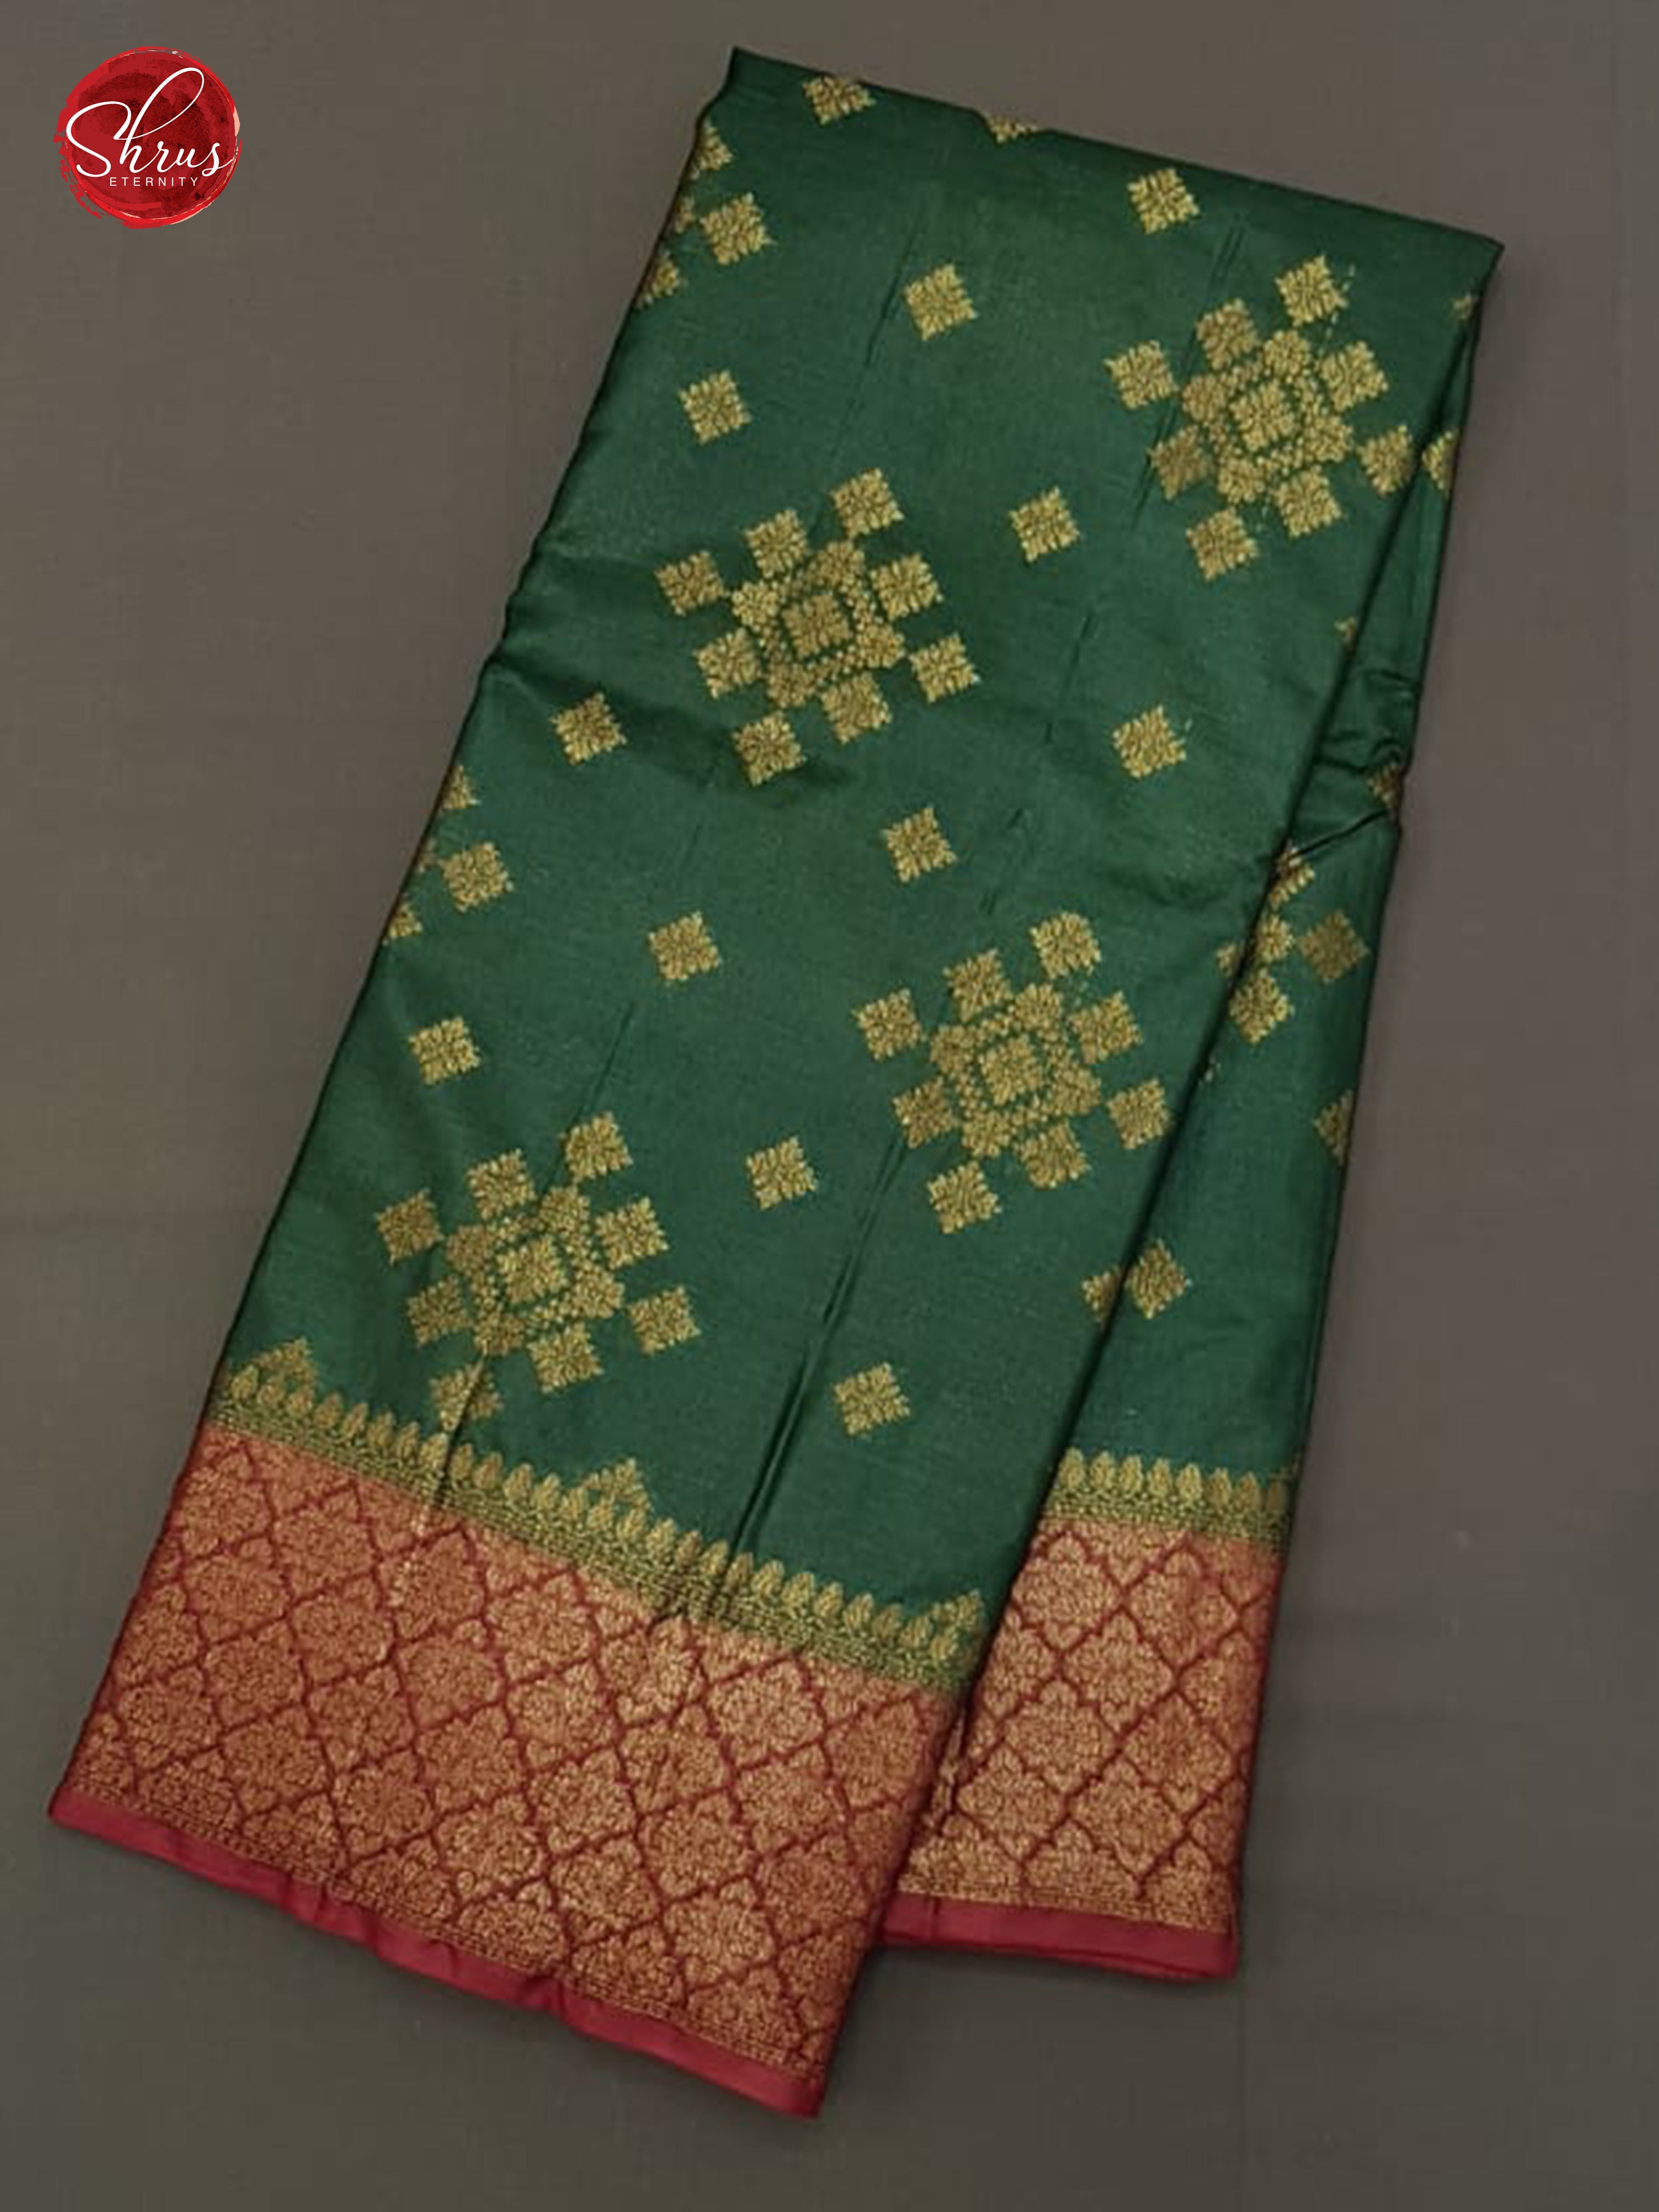 Green & Red - Tussar with zari woven floral motifs on the body & Zari Border - Shop on ShrusEternity.com